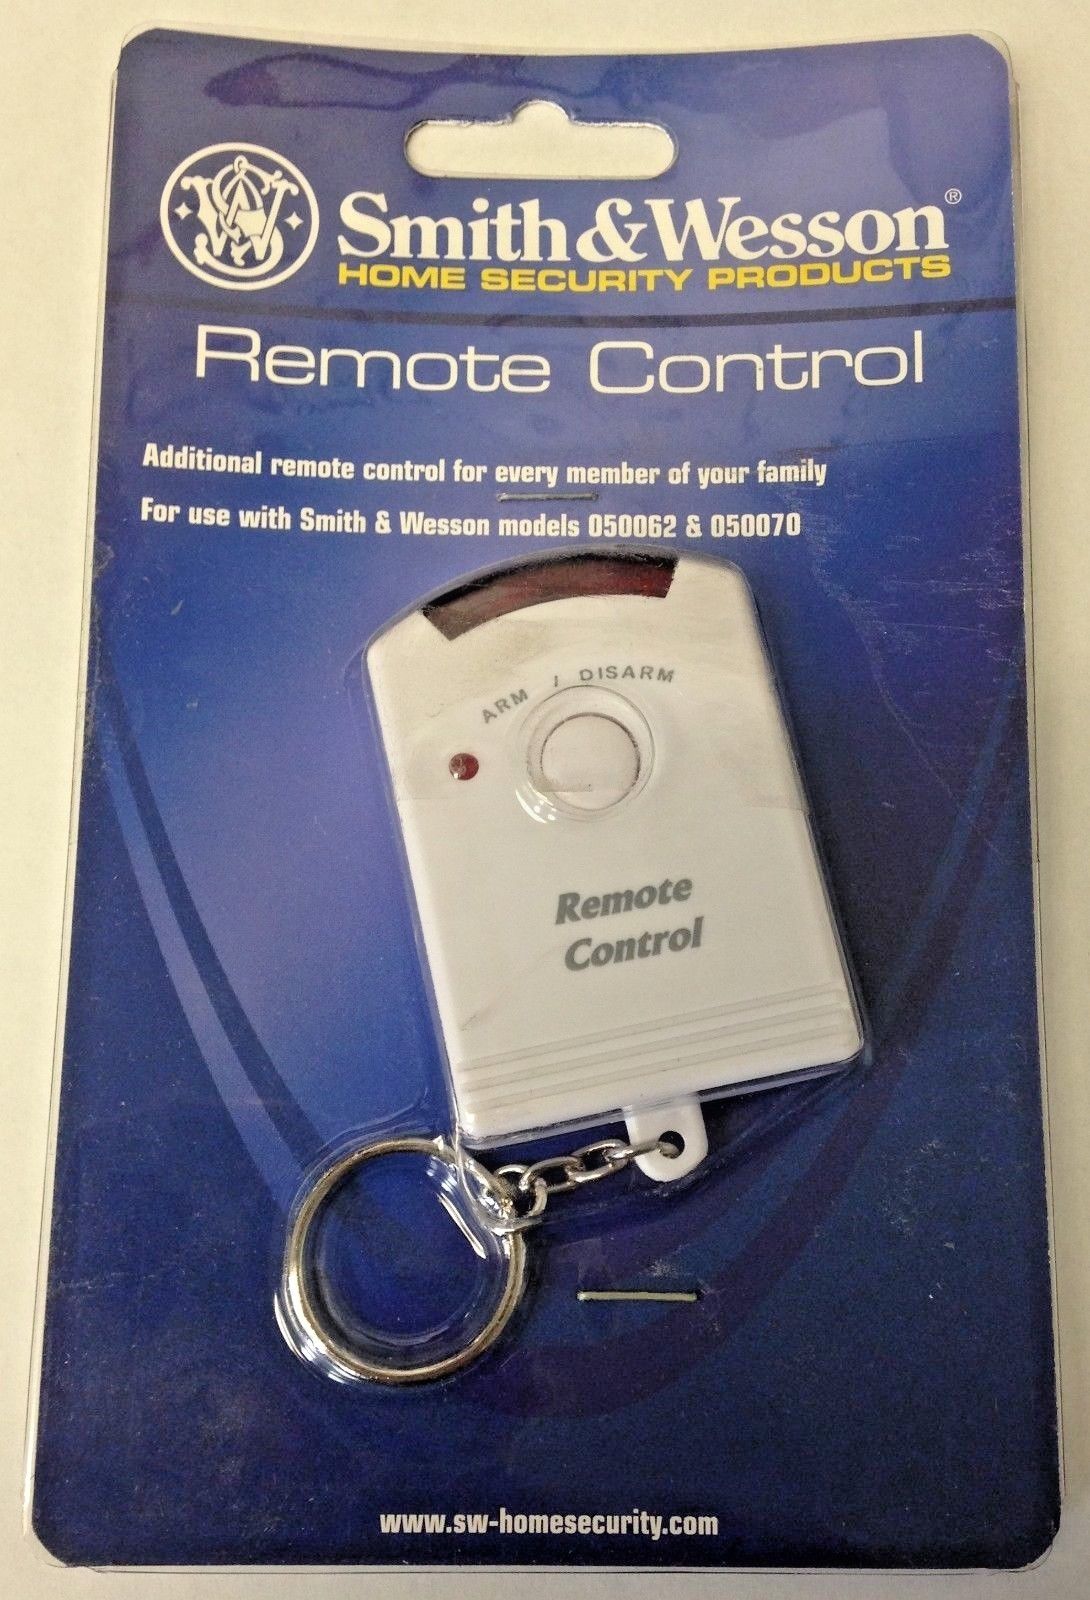 Smith & Wesson 050773 Remote Control For Models 050062 & 050070